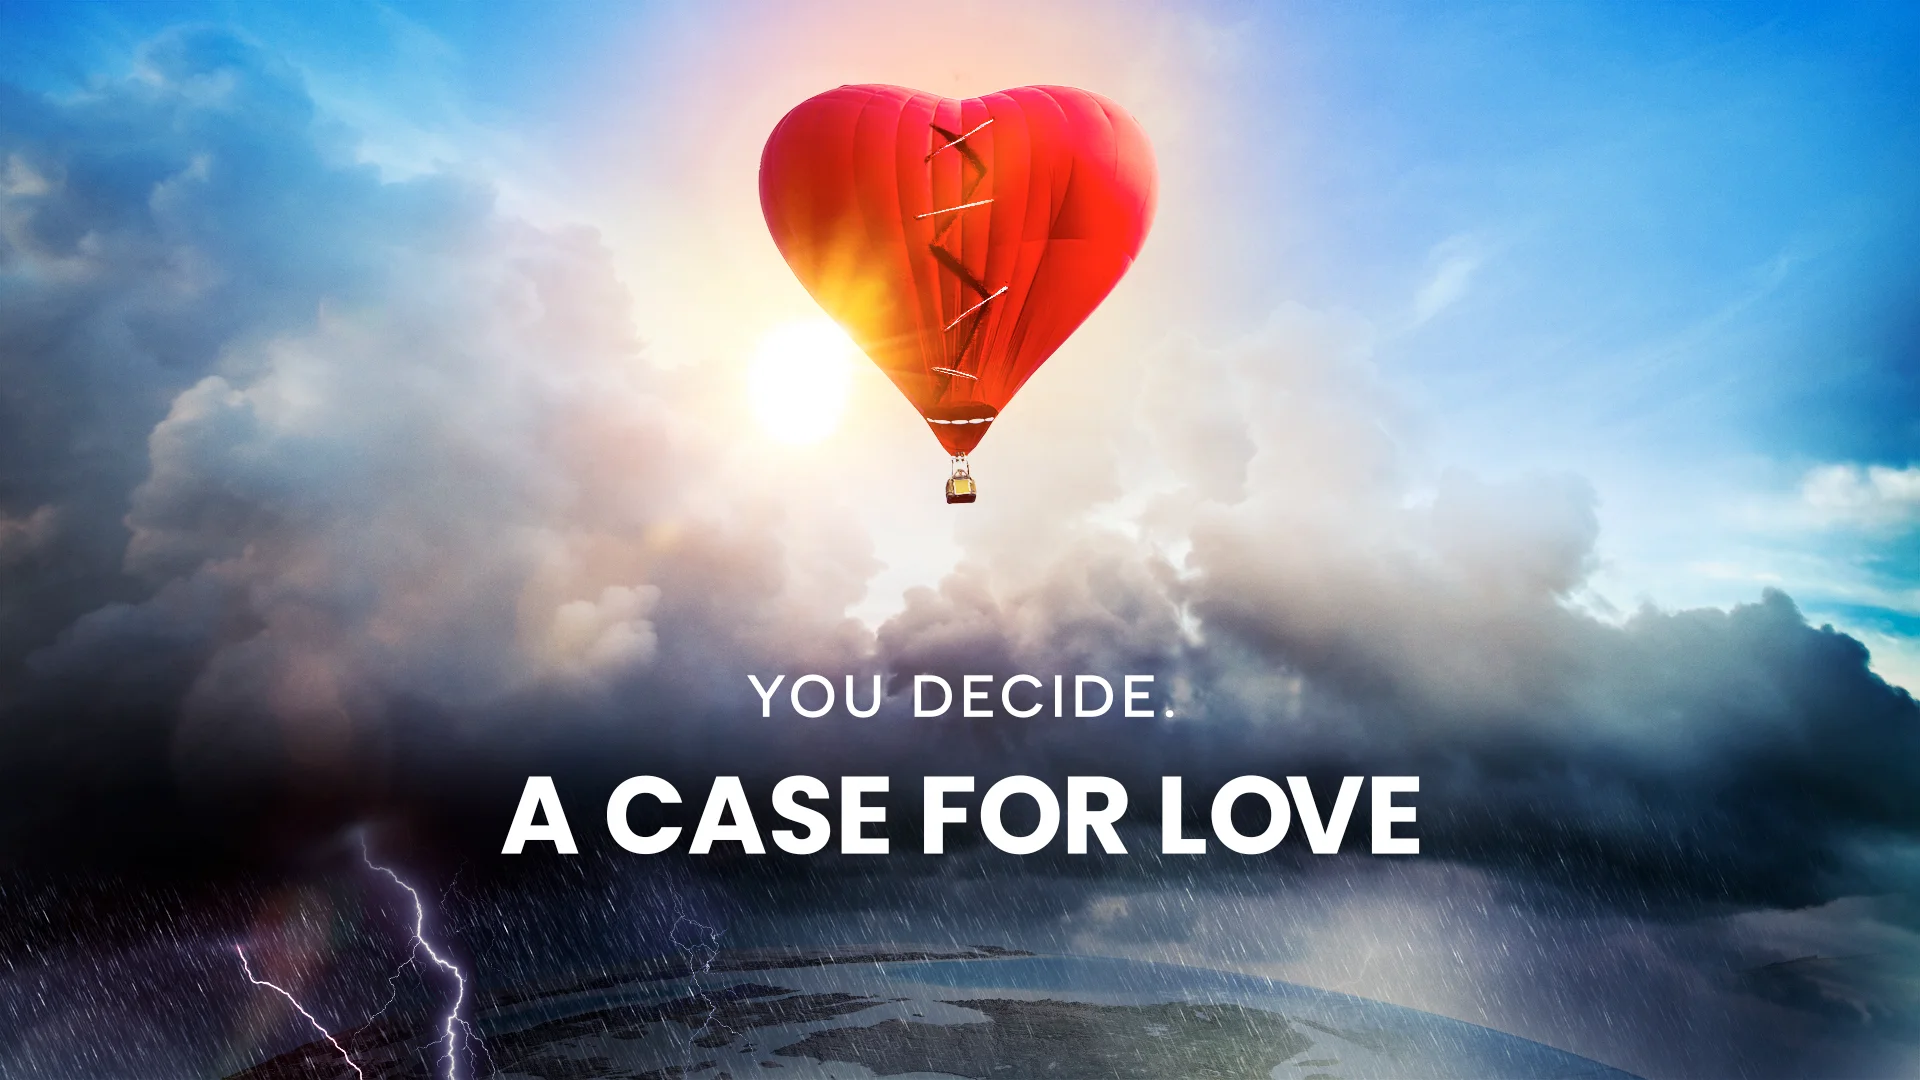 A Case for Love documentary trailer on Vimeo